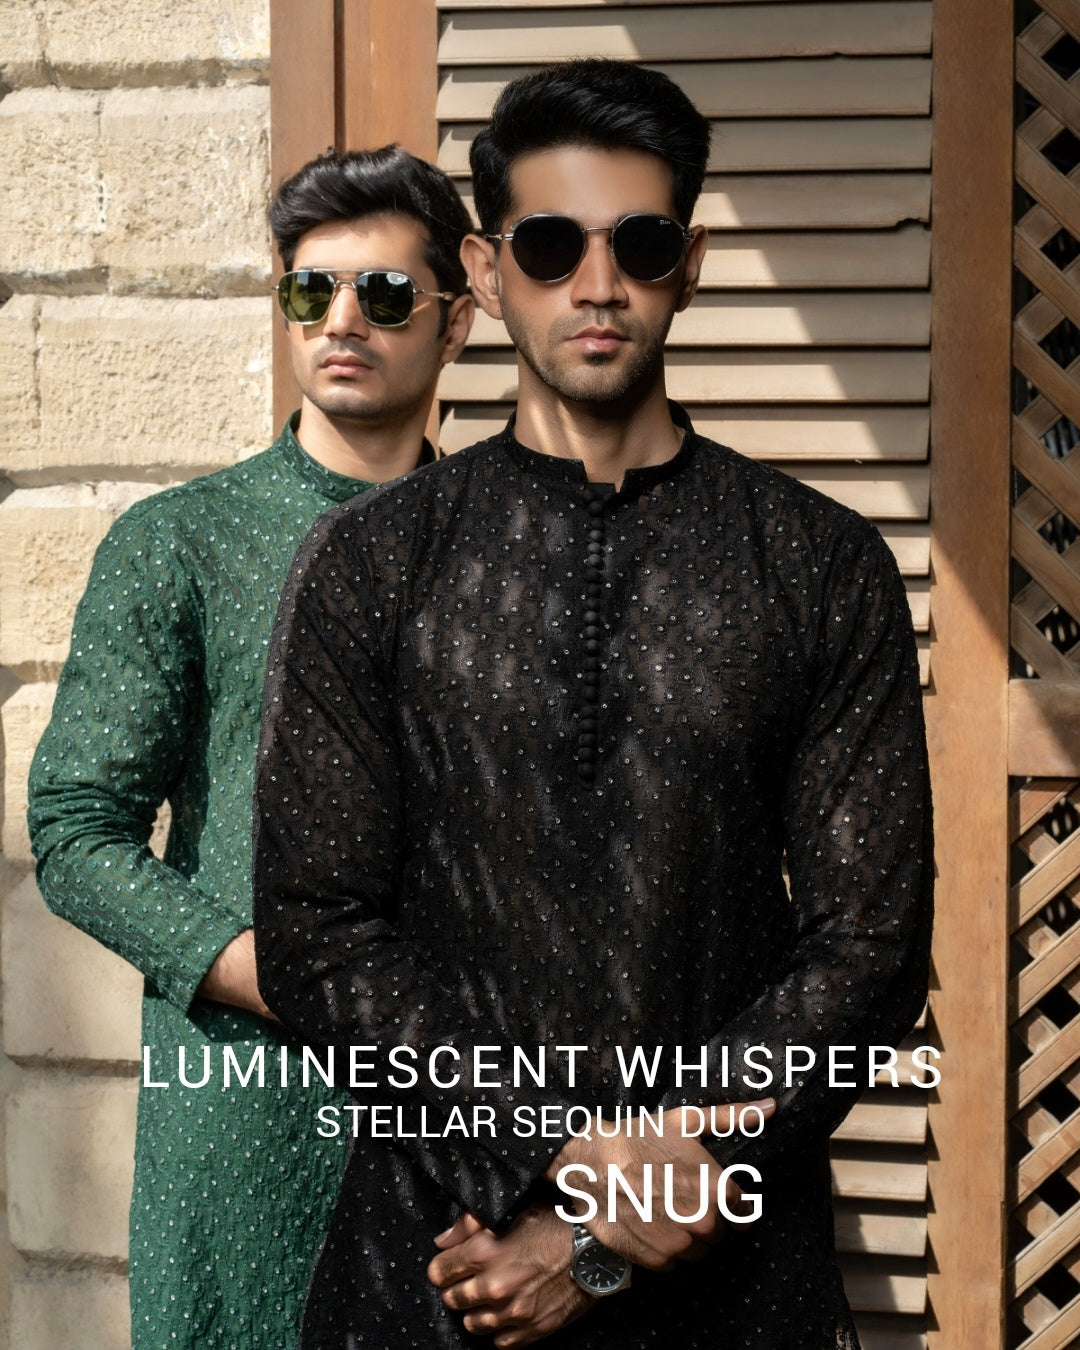 Luminescent Whispers - Stellar Sequin Duo by Snug.